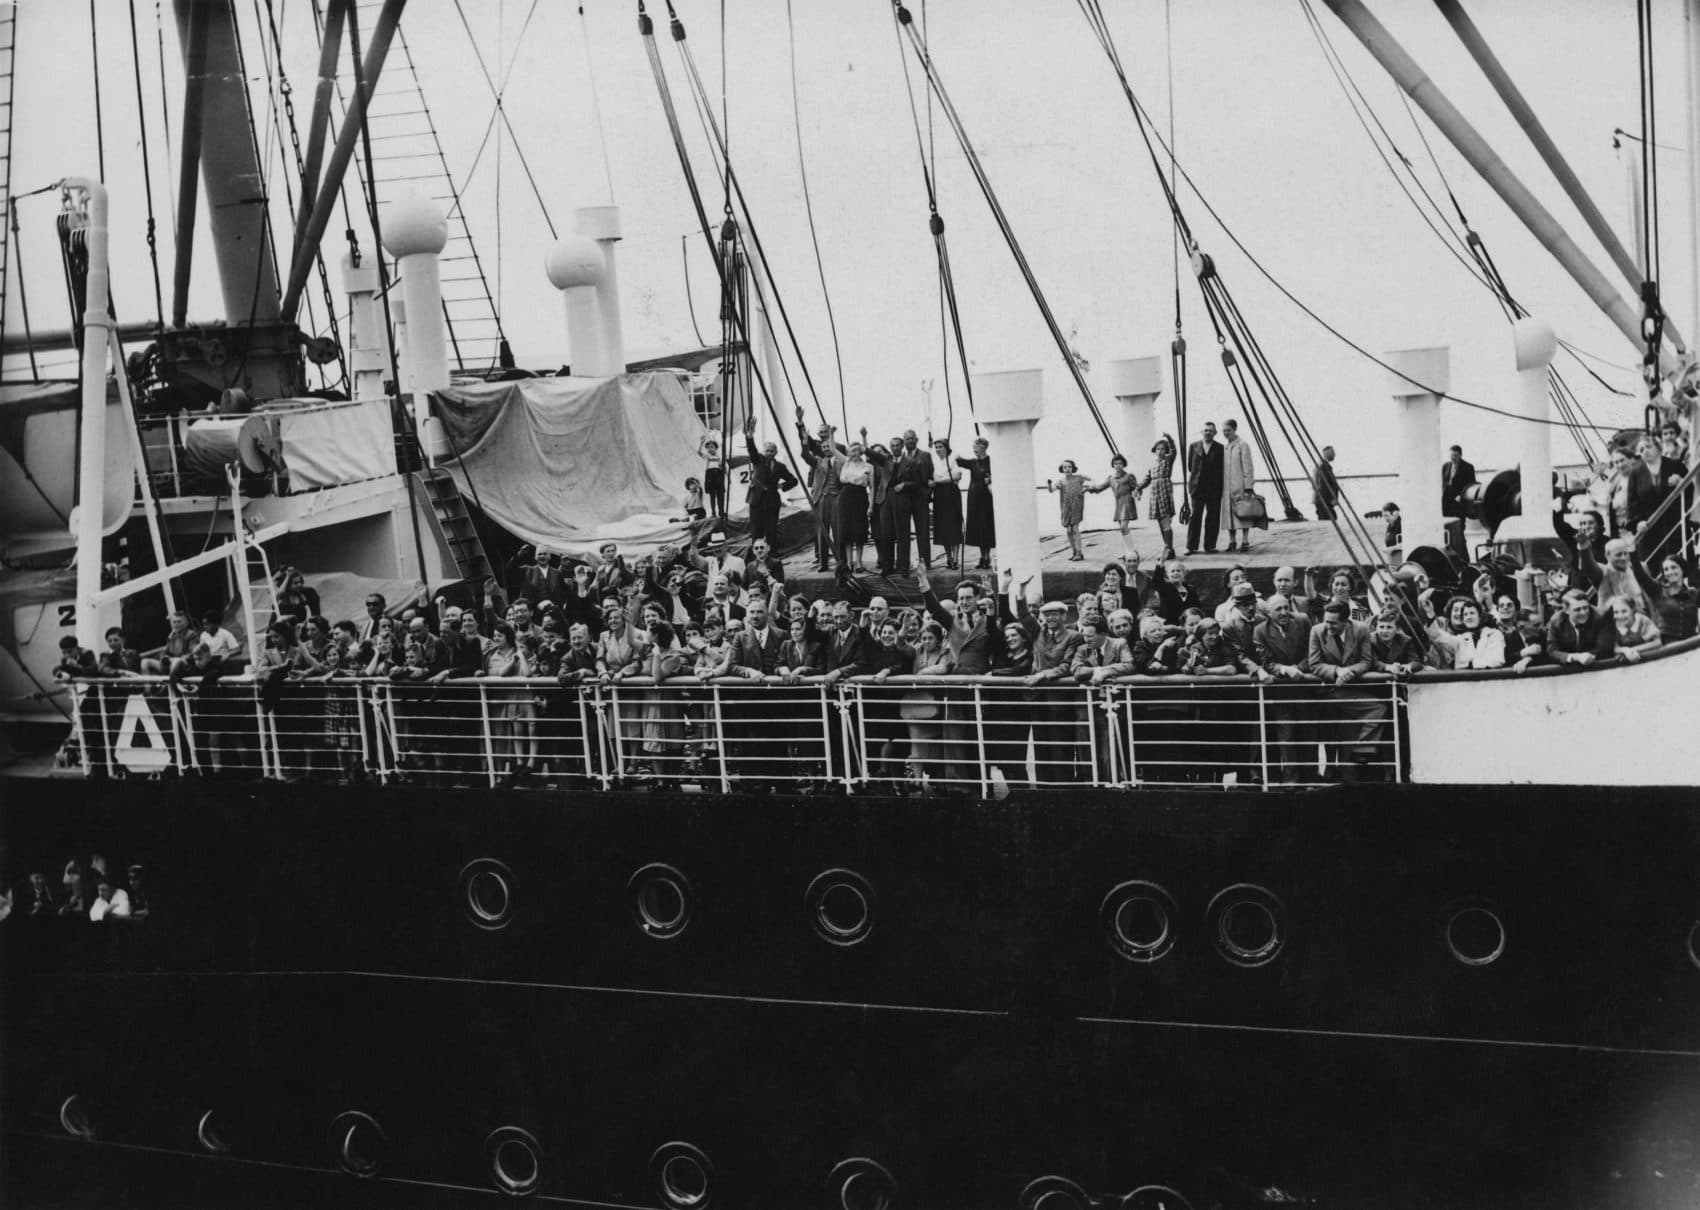 Refugees arrive in Antwerp on the MS St. Louis on June 17, 1939, after over a month at sea, during which they were denied entry to Cuba, the United States and Canada. The St. Louis had originally sailed from Hamburg to Cuba, carrying over 937 mainly German-Jewish refugees from Nazi persecution. (Three Lions/Hulton Archive/Getty Images)